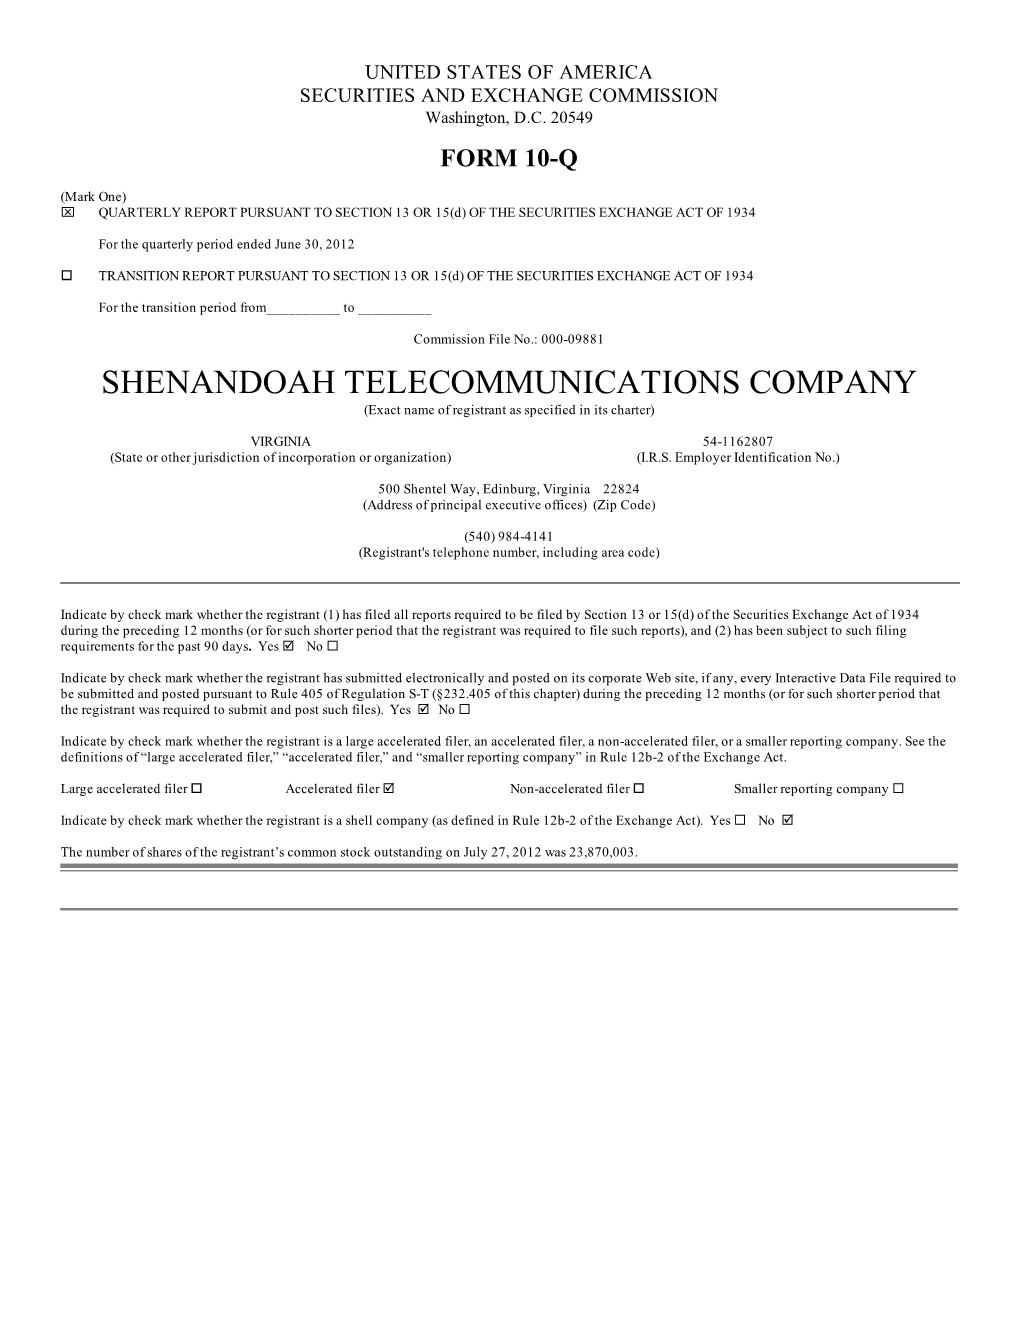 SHENANDOAH TELECOMMUNICATIONS COMPANY (Exact Name of Registrant As Specified in Its Charter)